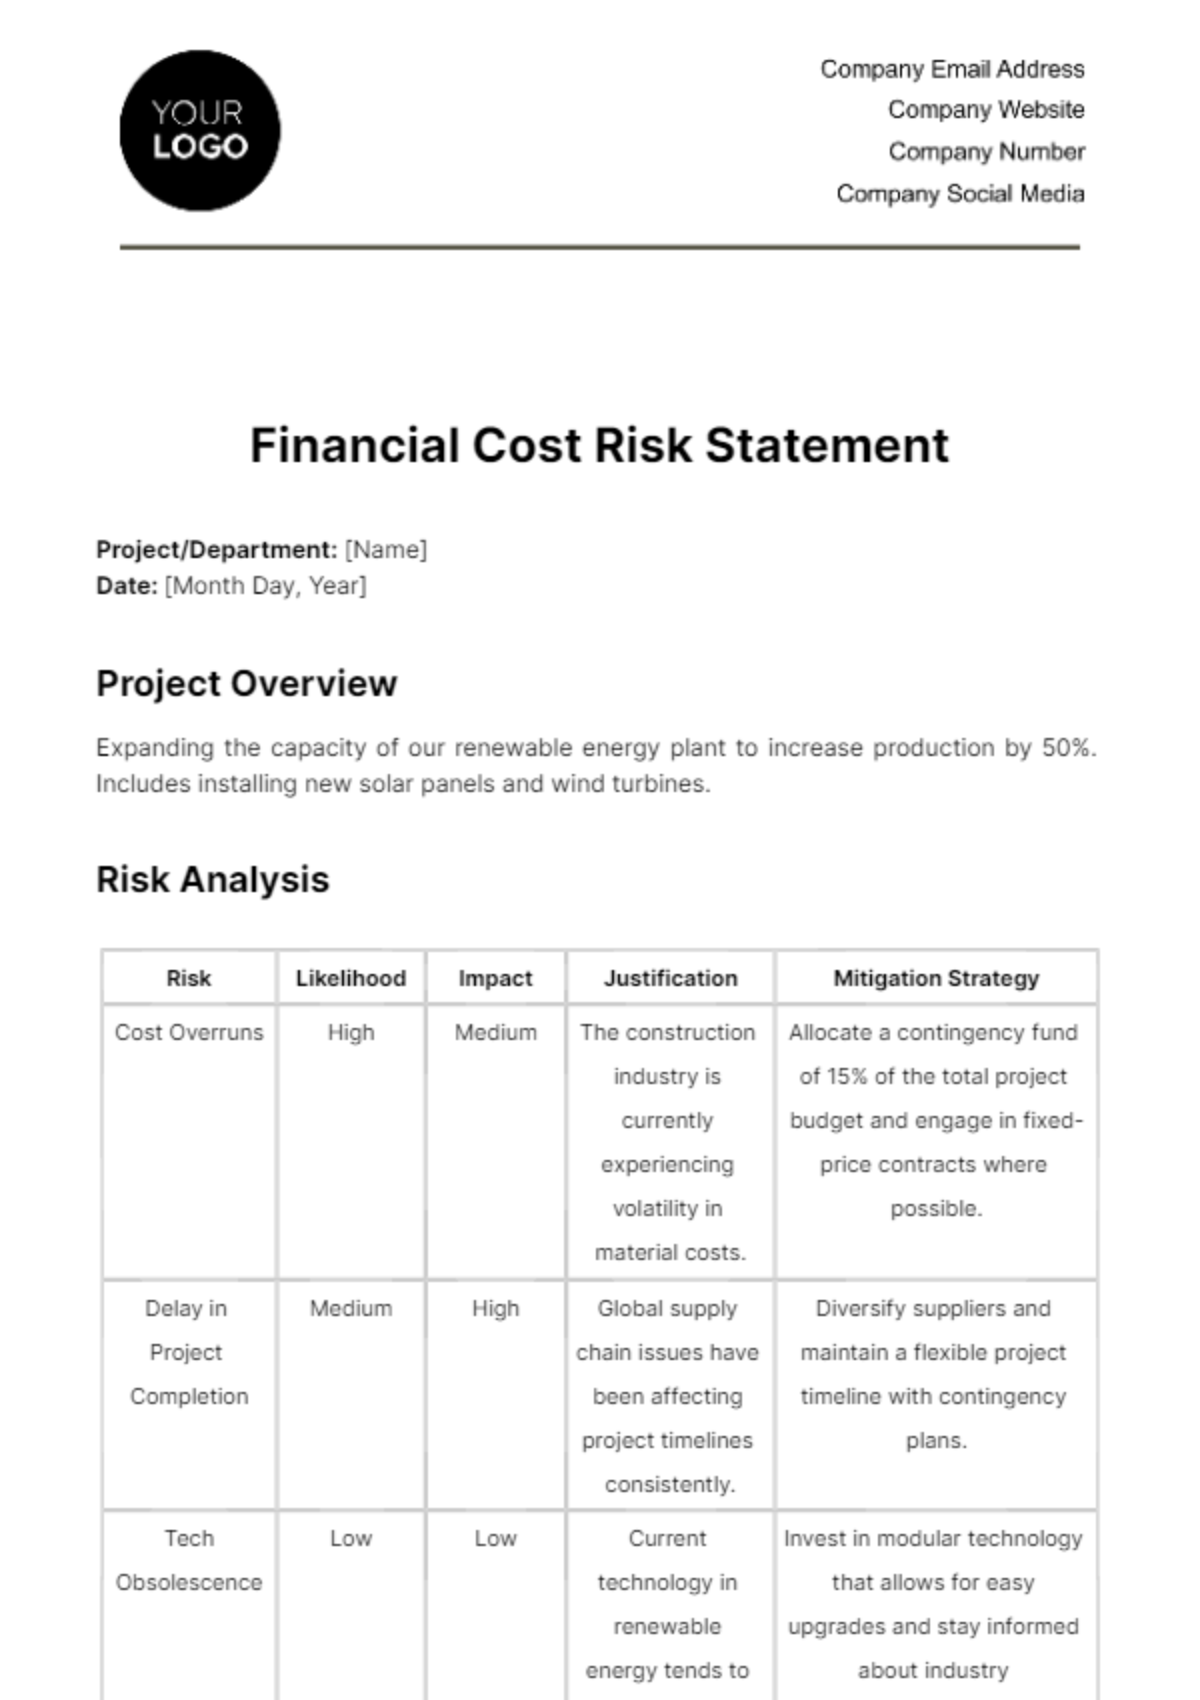 Financial Cost Risk Statement Template